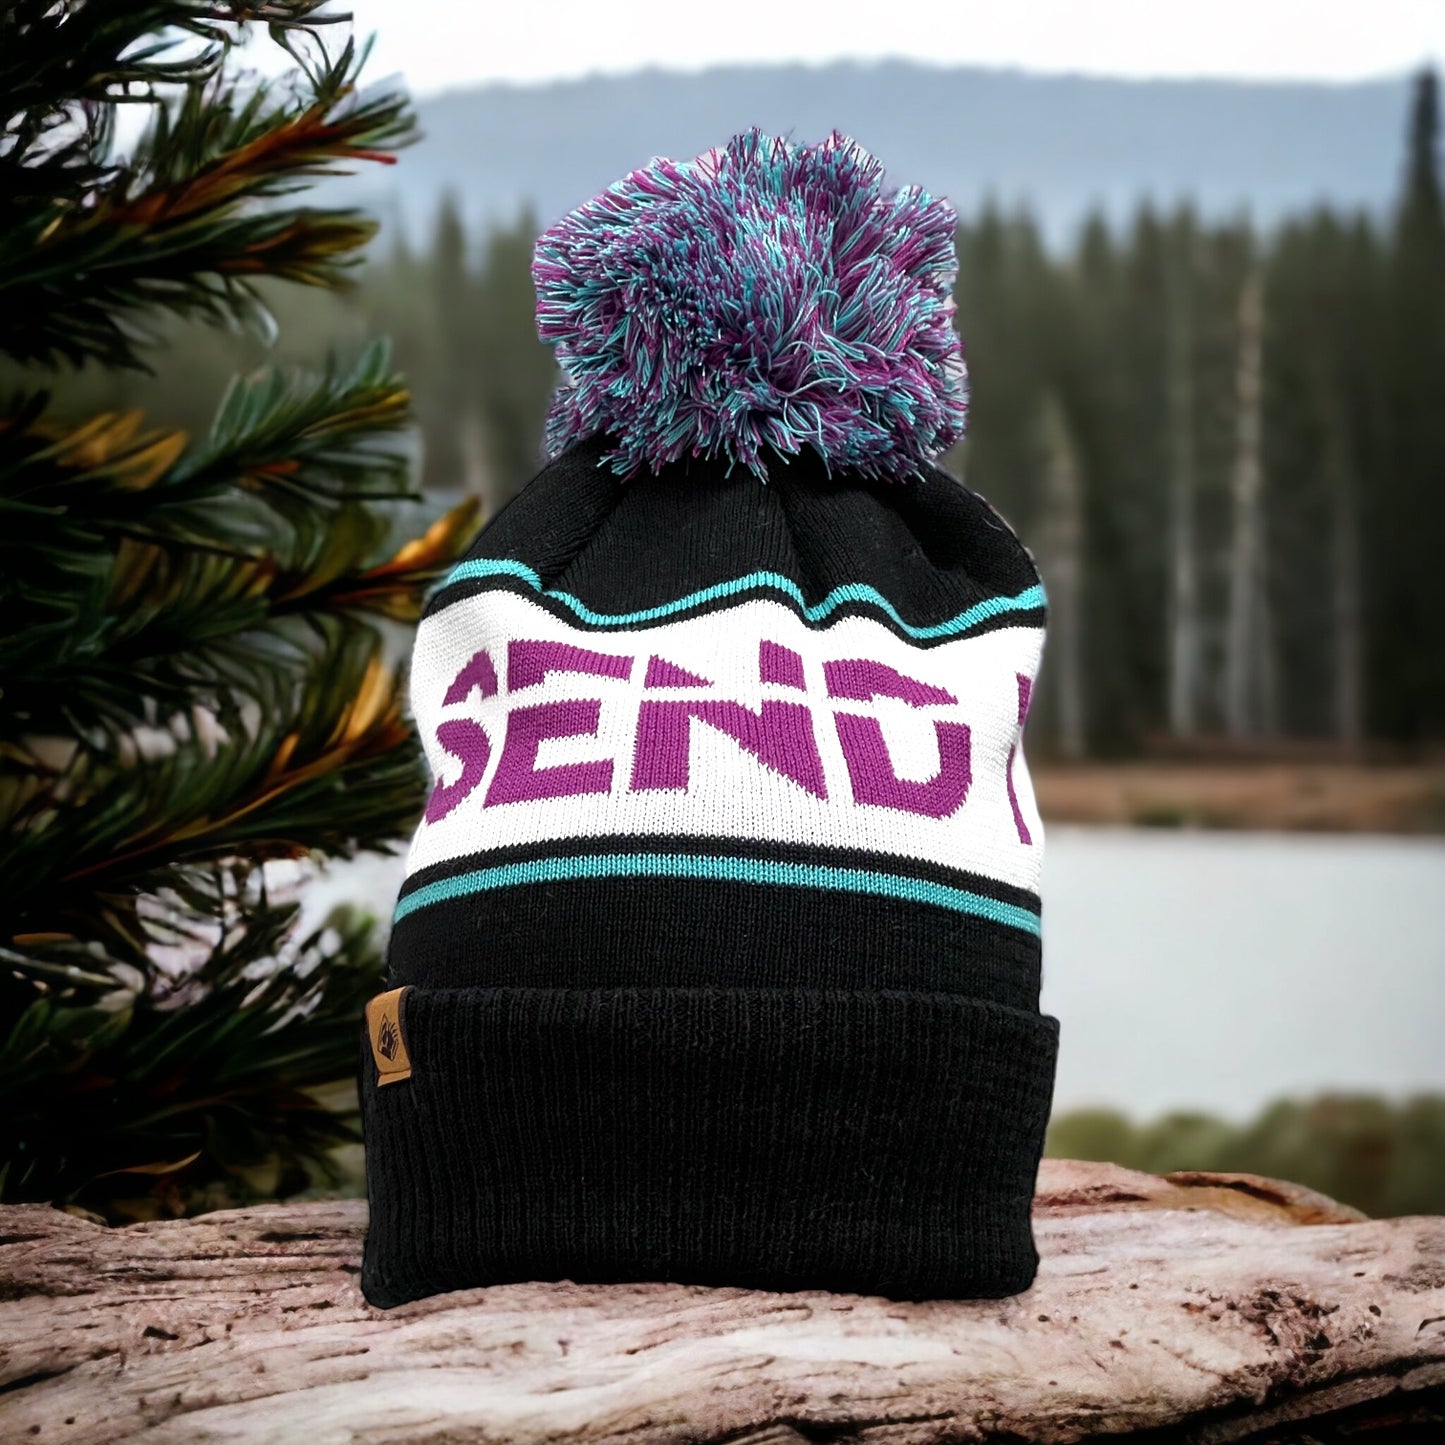 Black beanie with mixed purple and blue pom SEND IT graphic, Bear Tag on the left corner